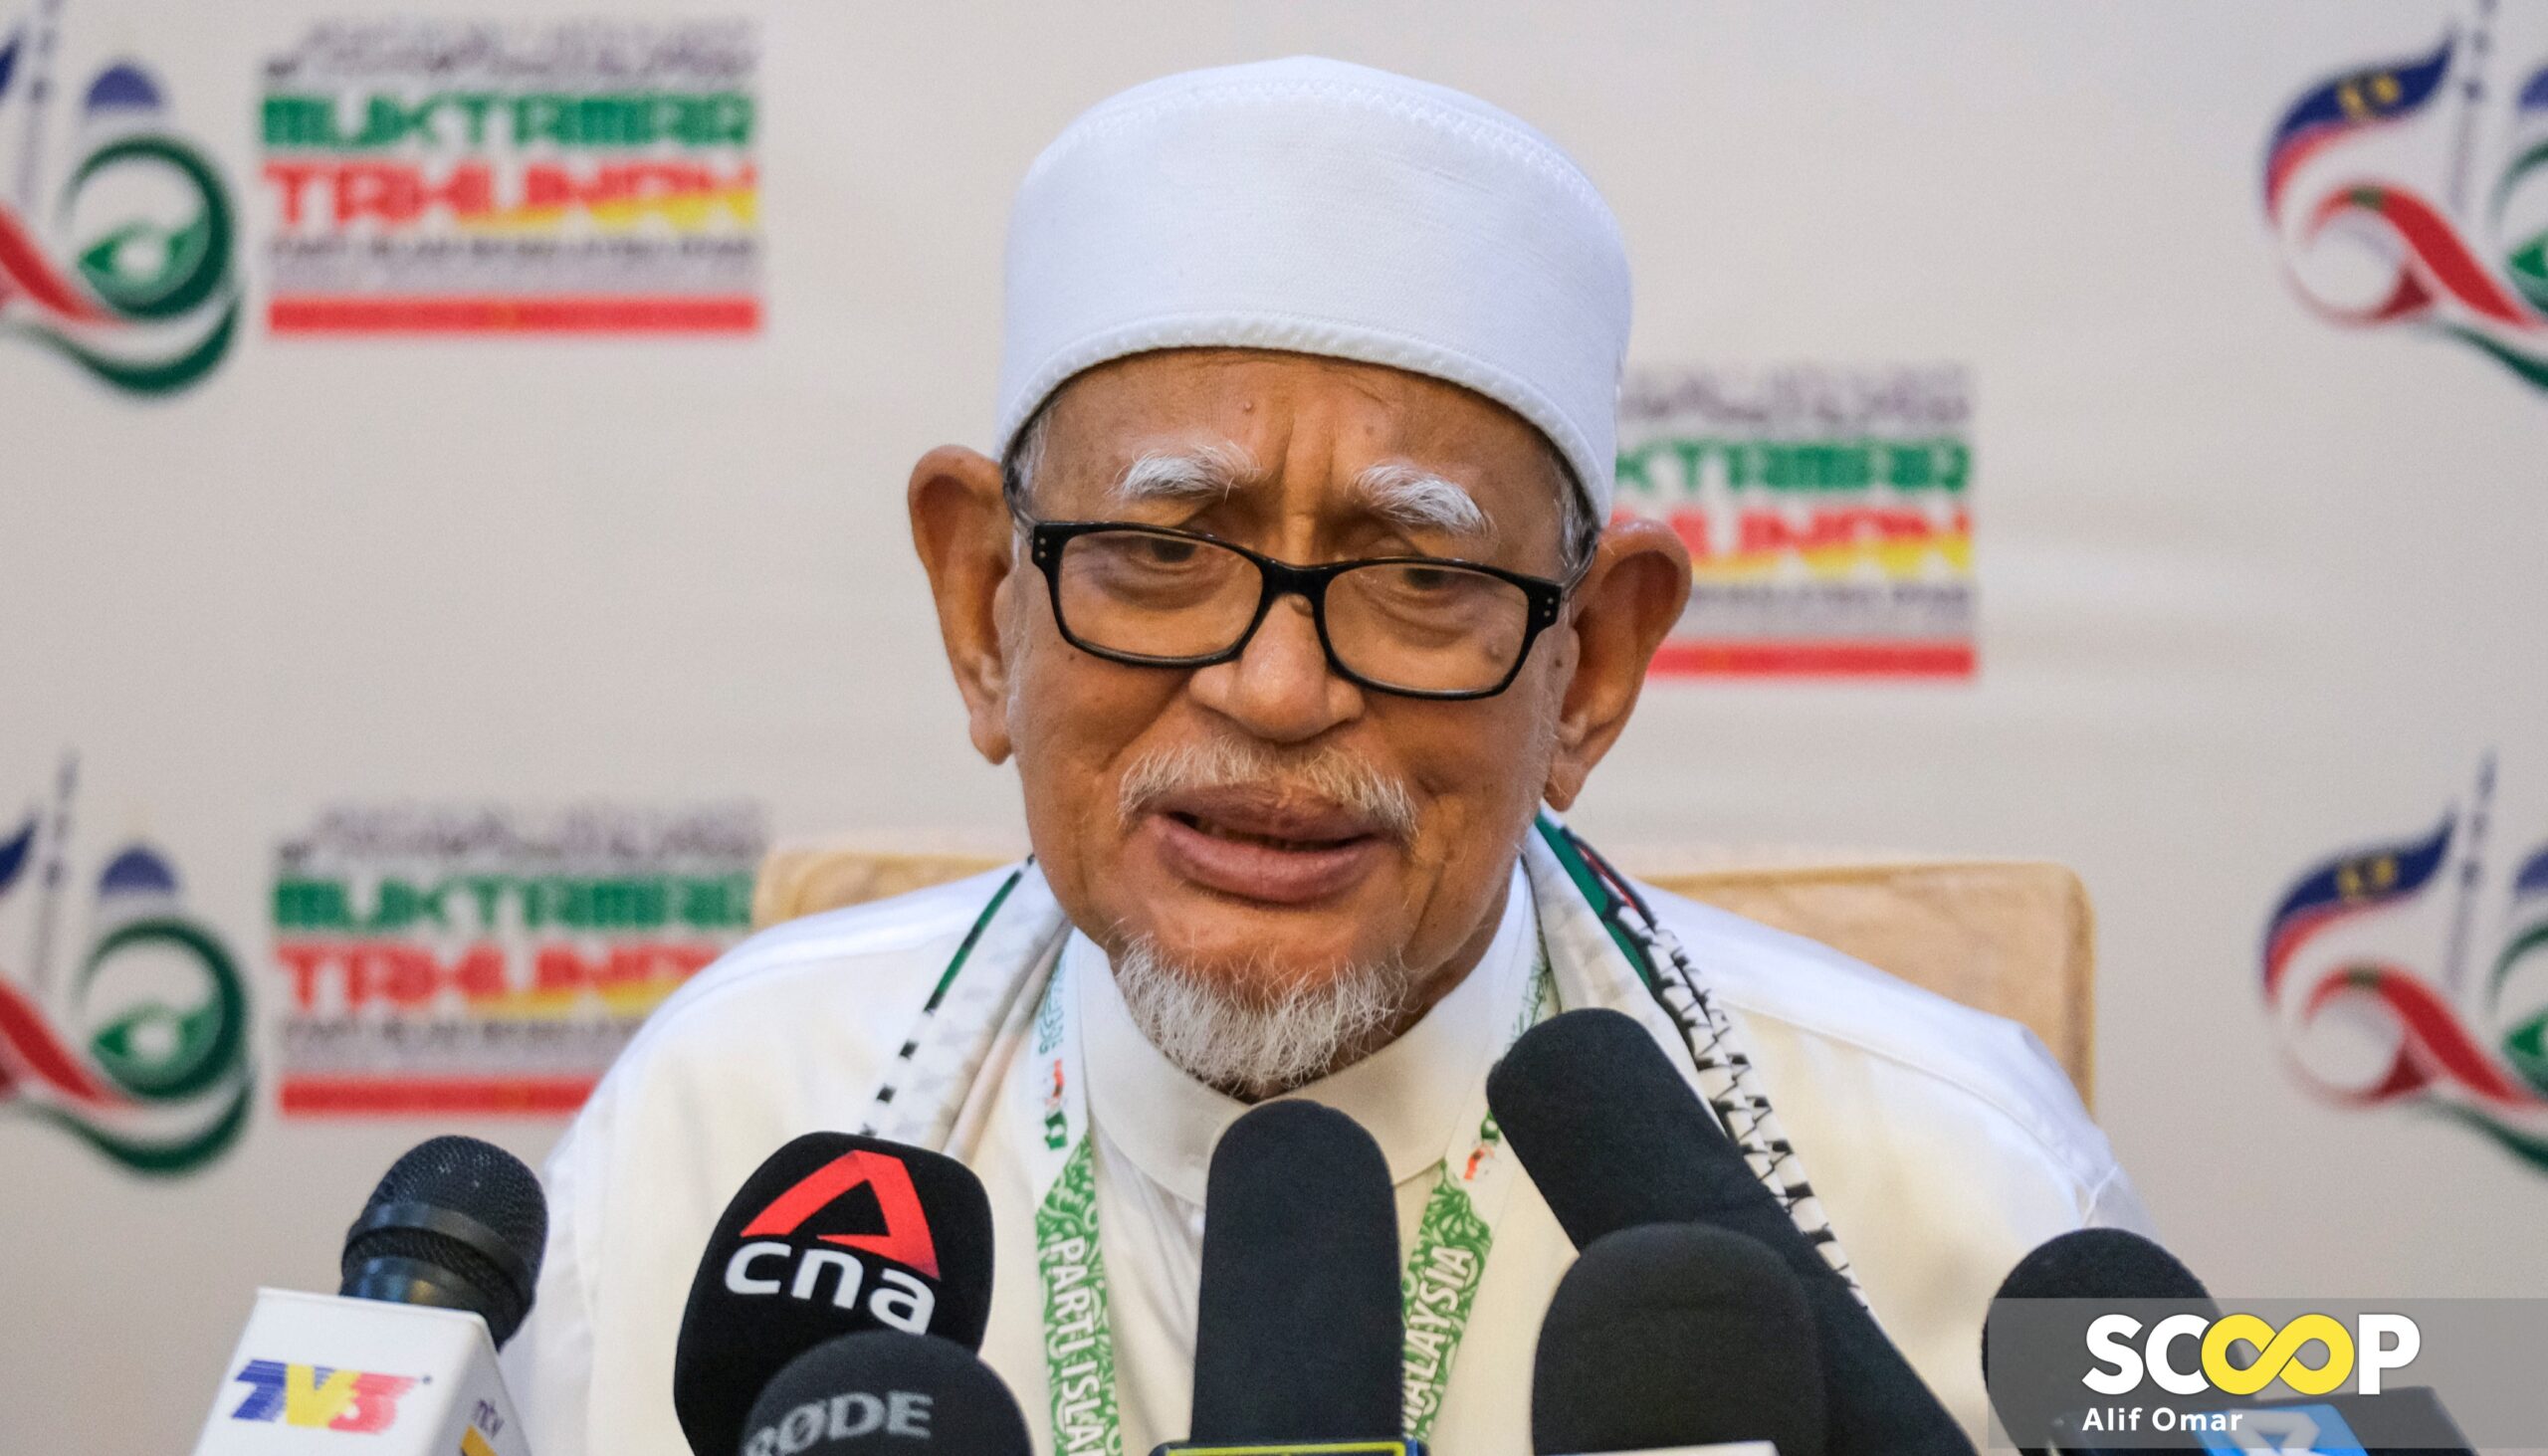 Hadi faces another sedition investigation